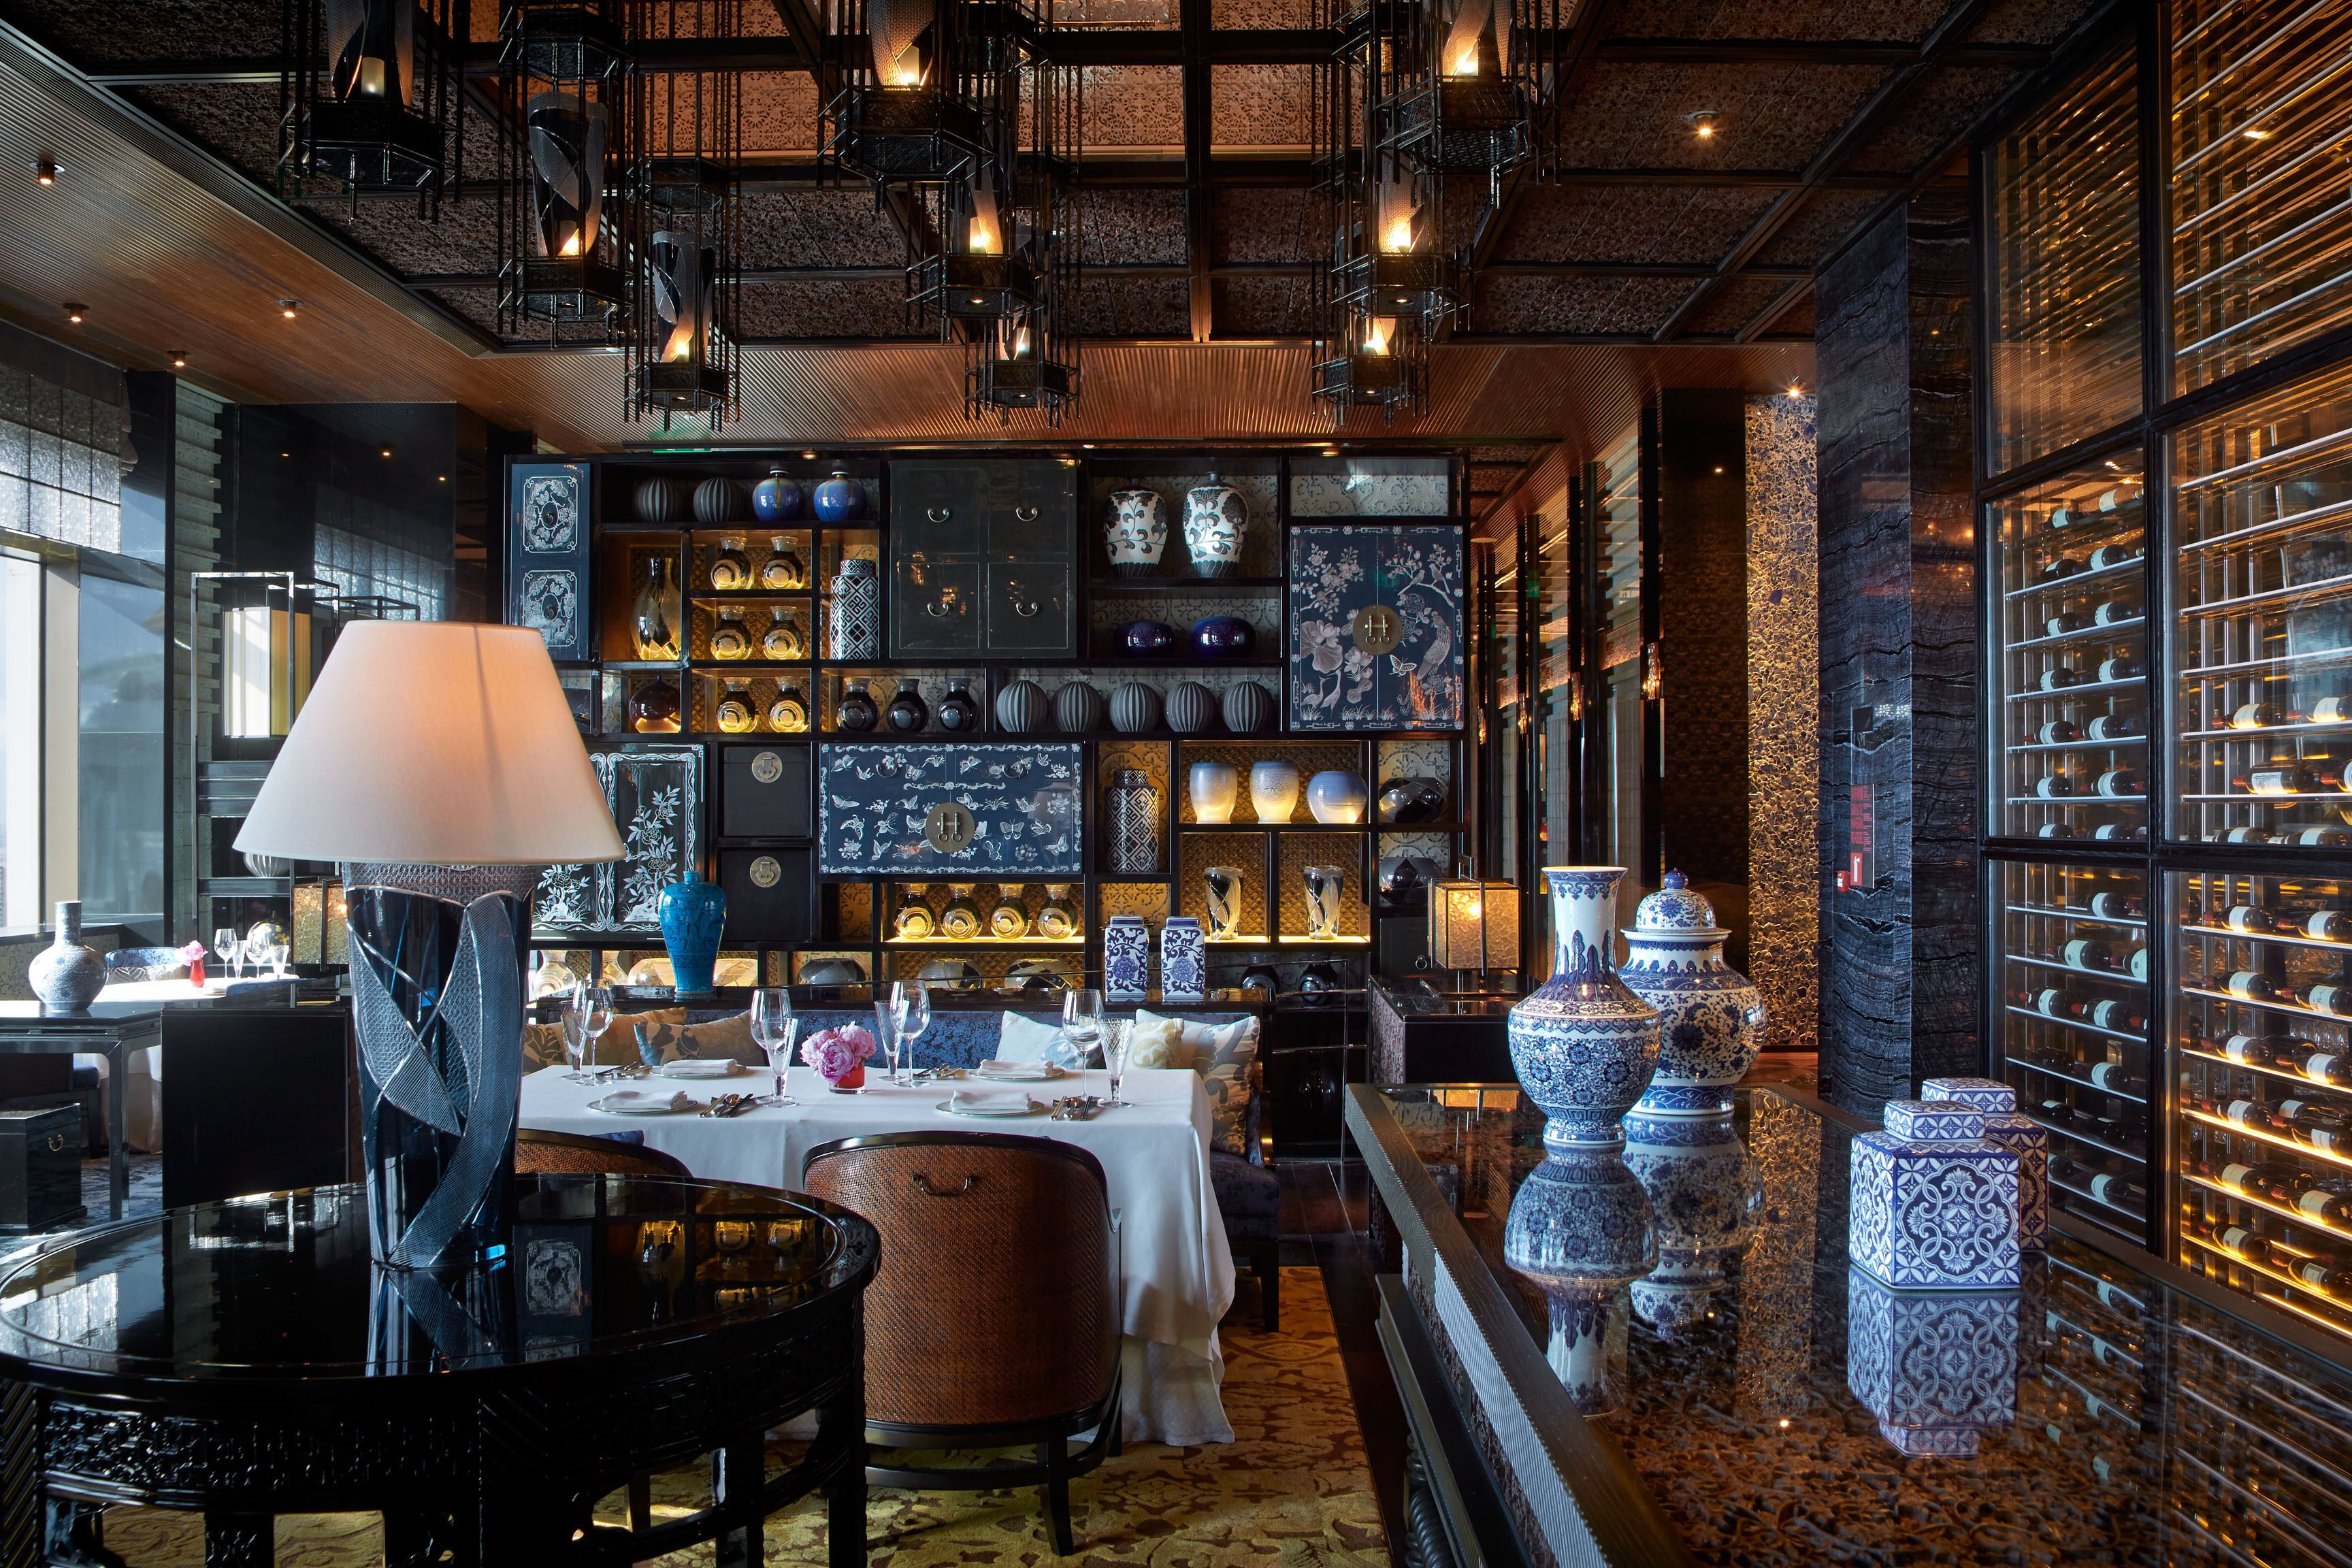 Lai Heen offers an intimate interior. Photo: Lai Heen